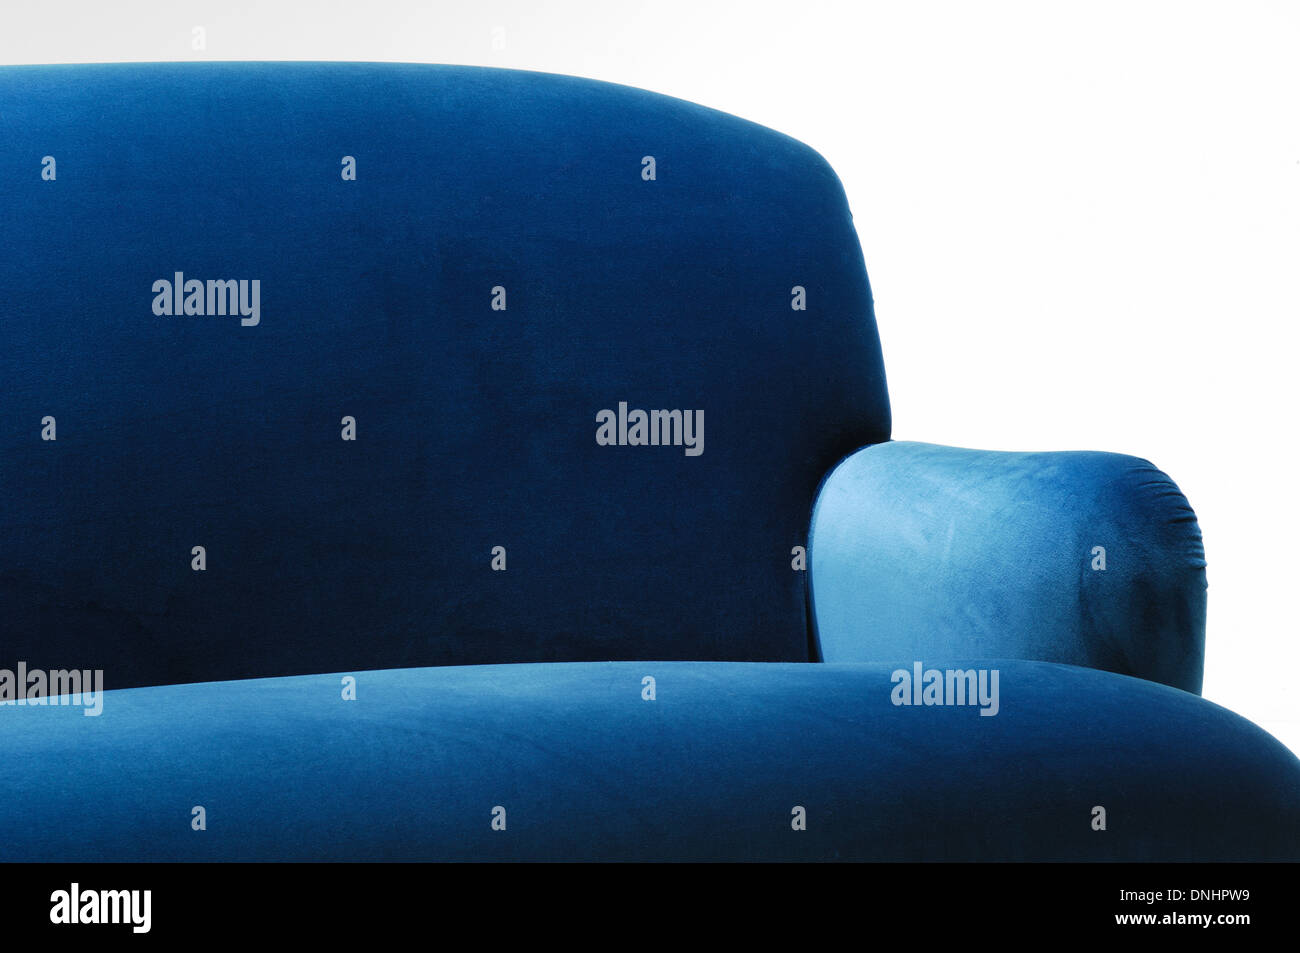 A section of a comfortable blue suede sofa couch furniture. Stock Photo